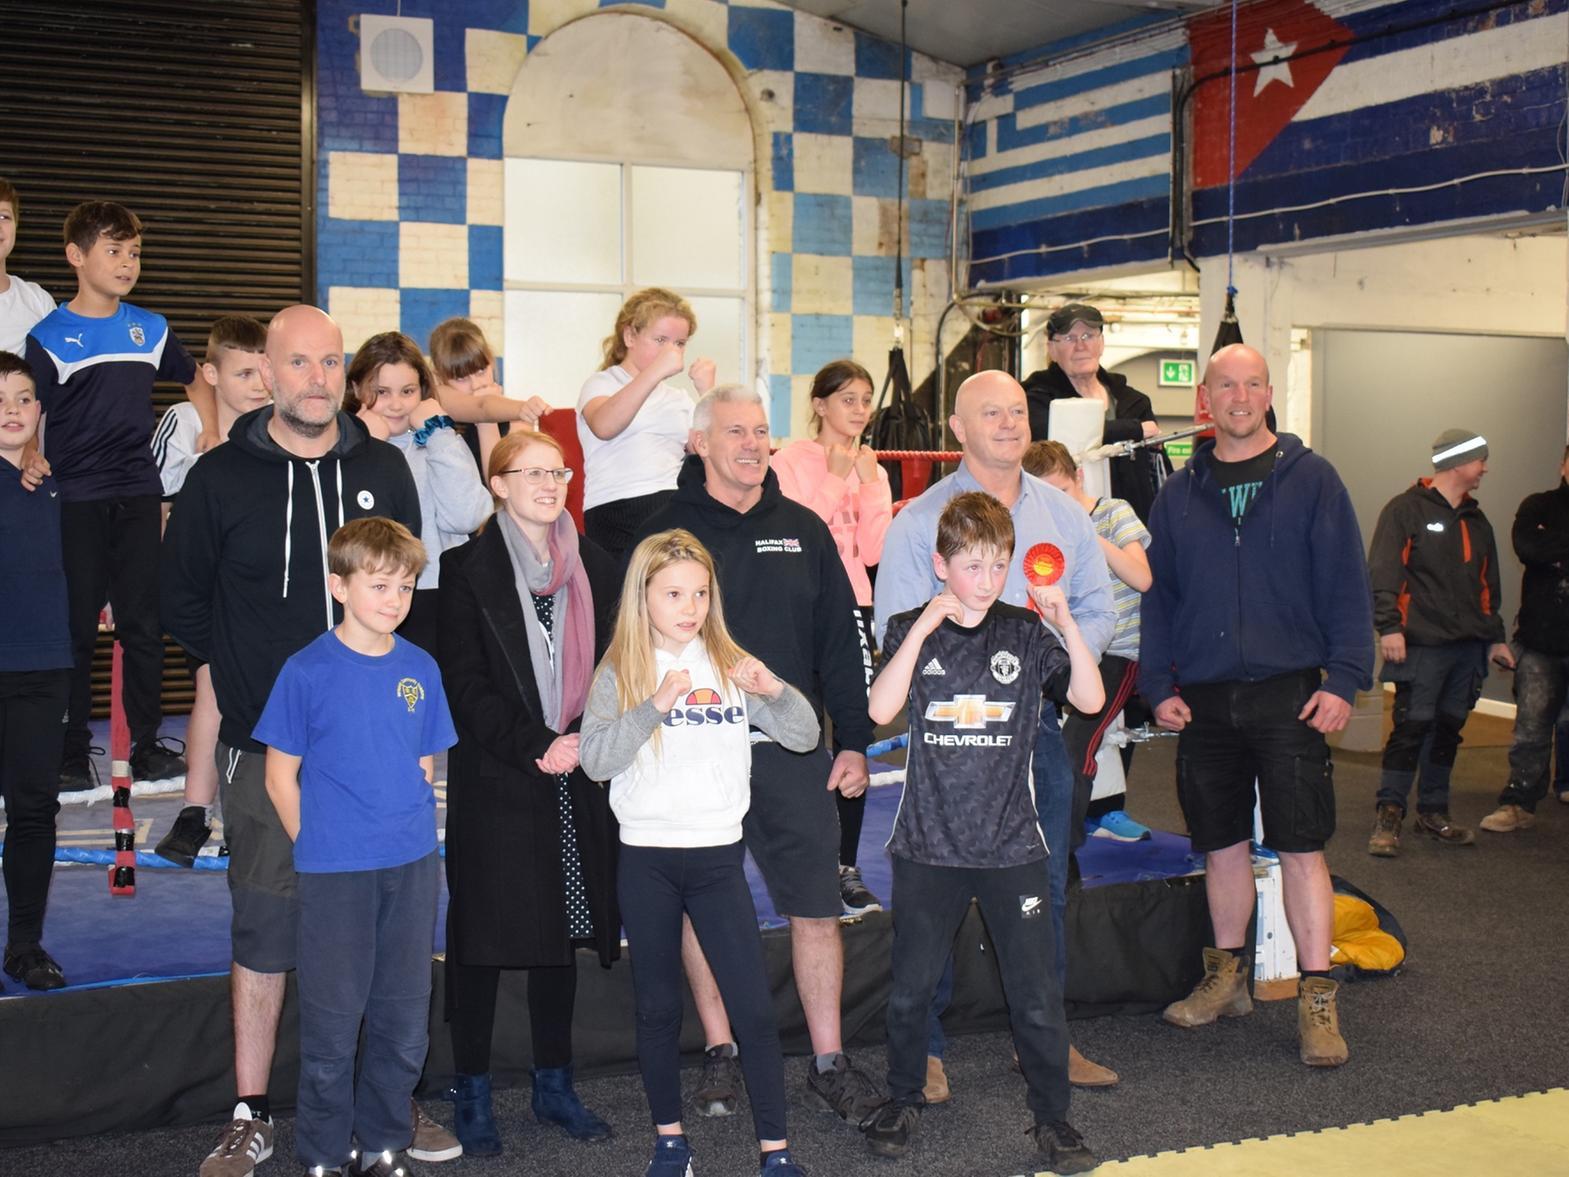 The team at the boxing club, Ms Lynch and Mr Kemp take time to pose for a couple of snaps